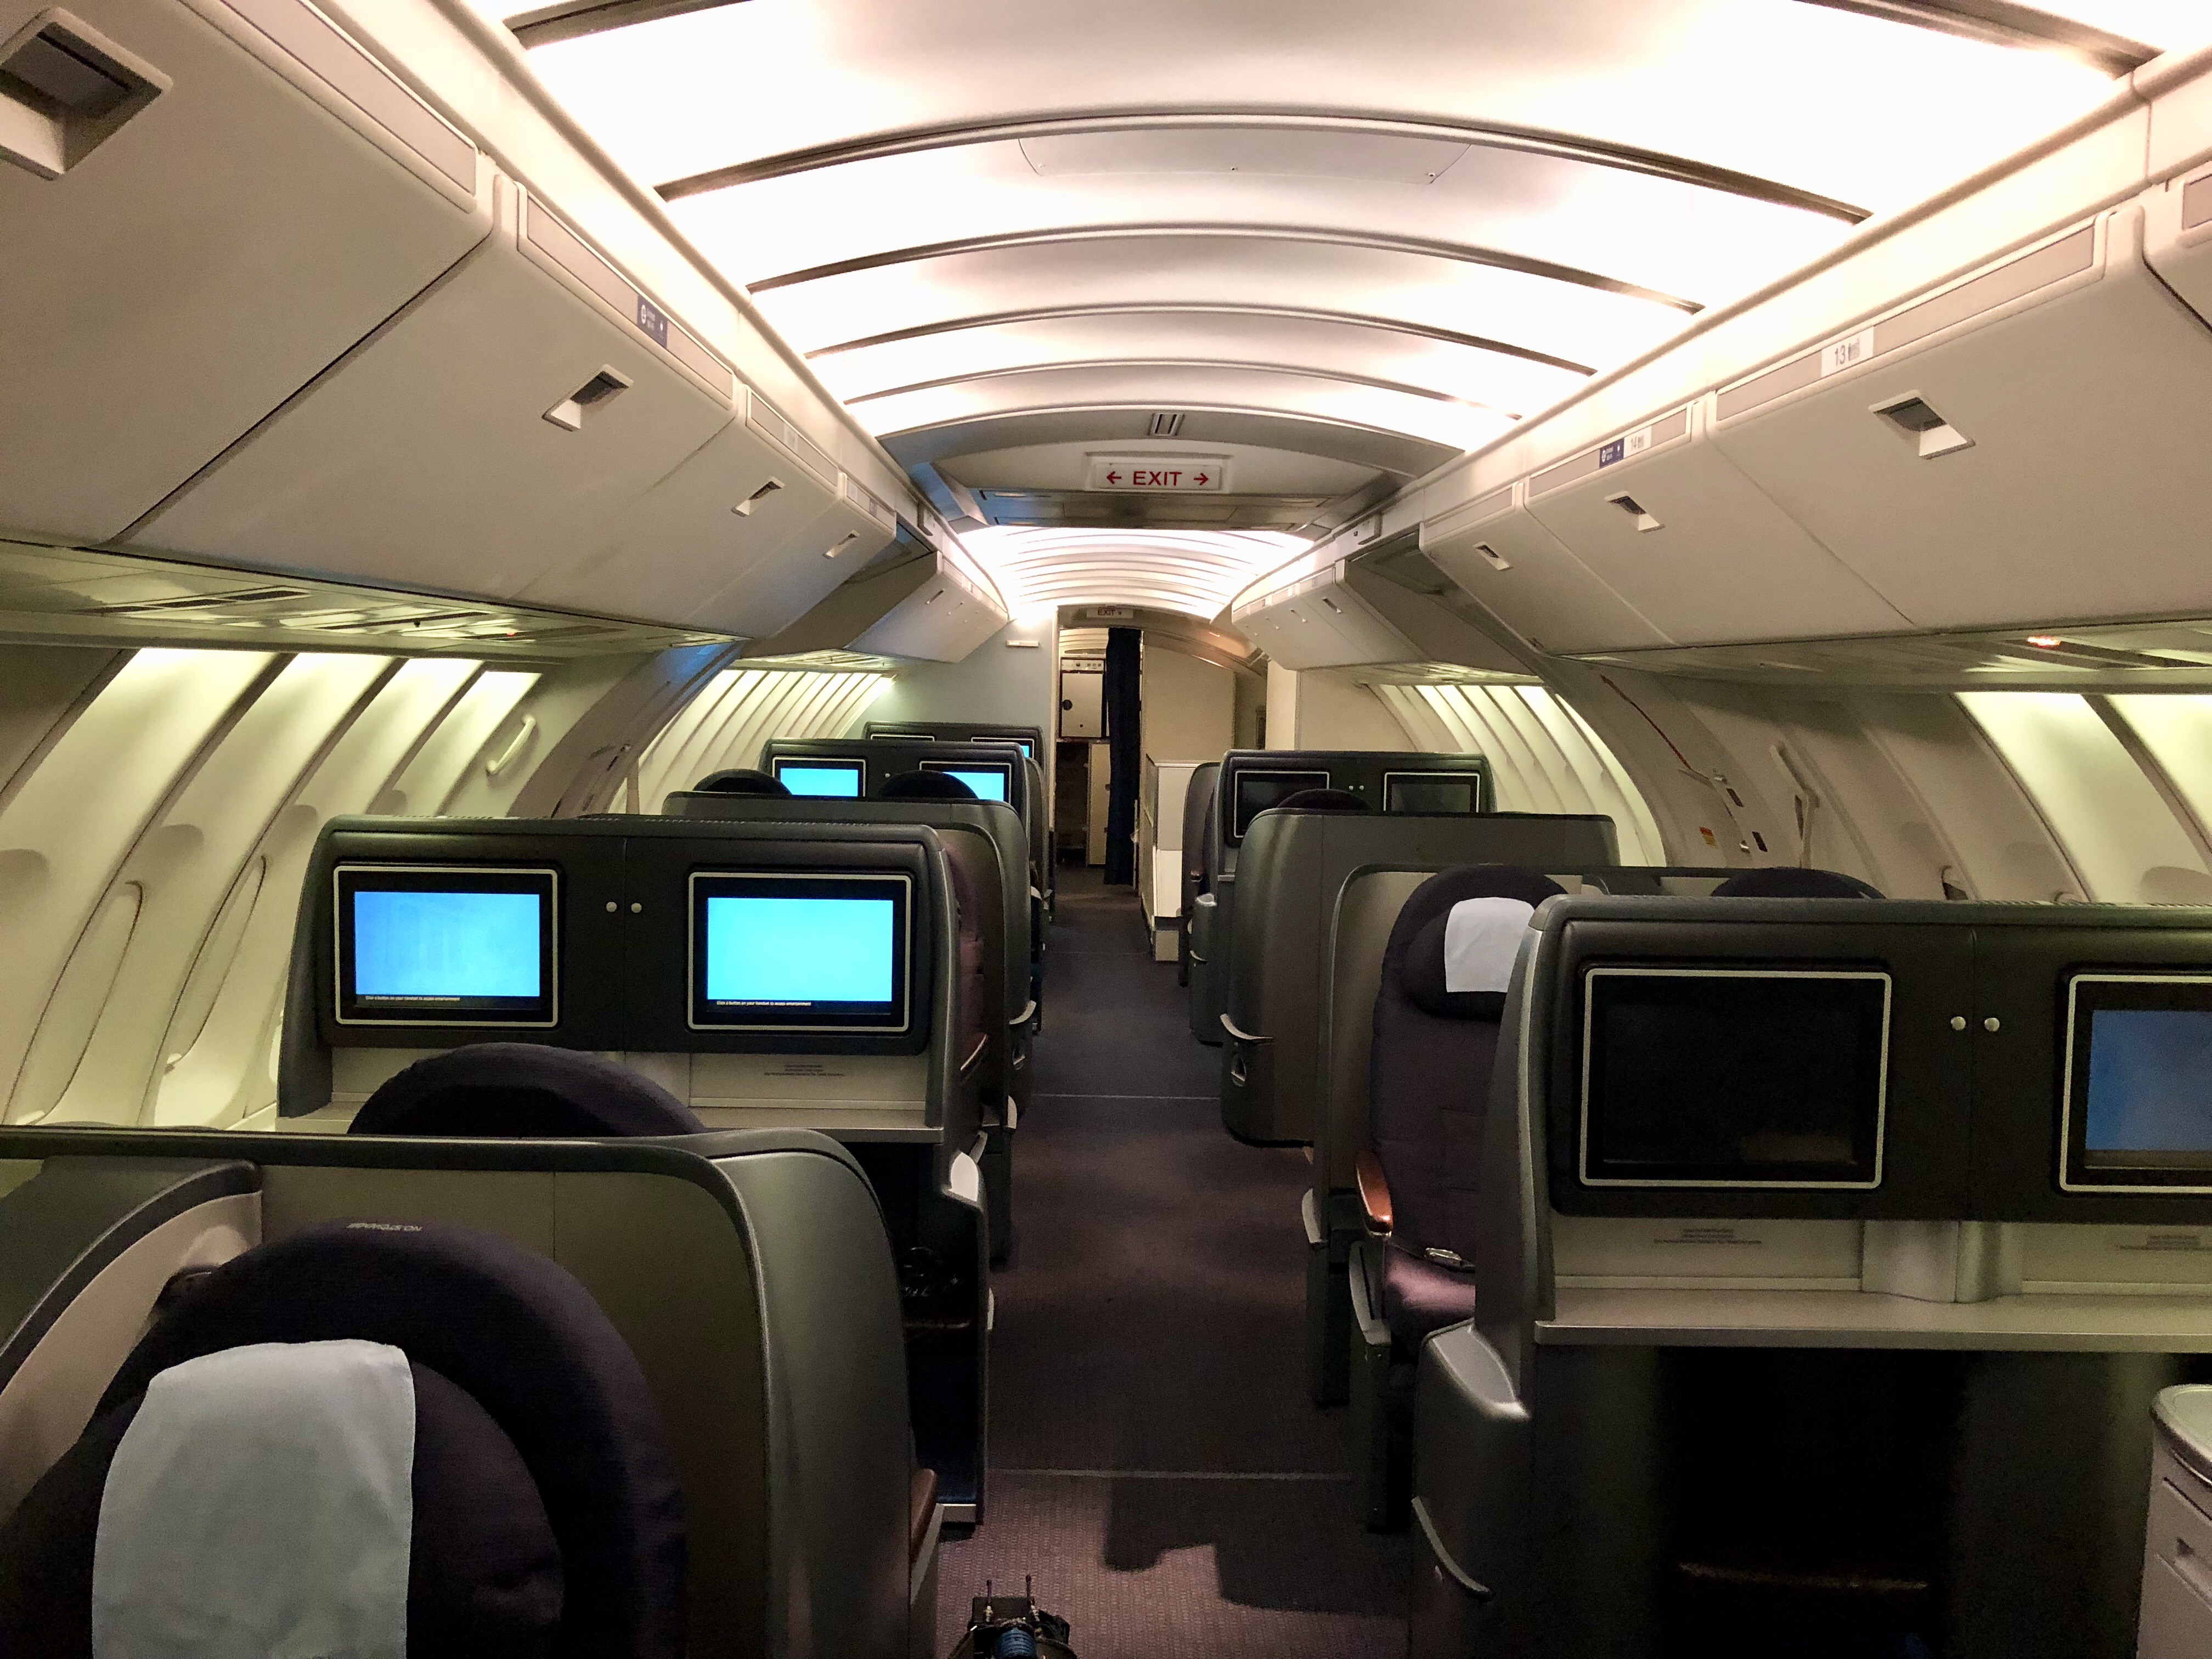 the inside of an airplane with rows of seats and monitors